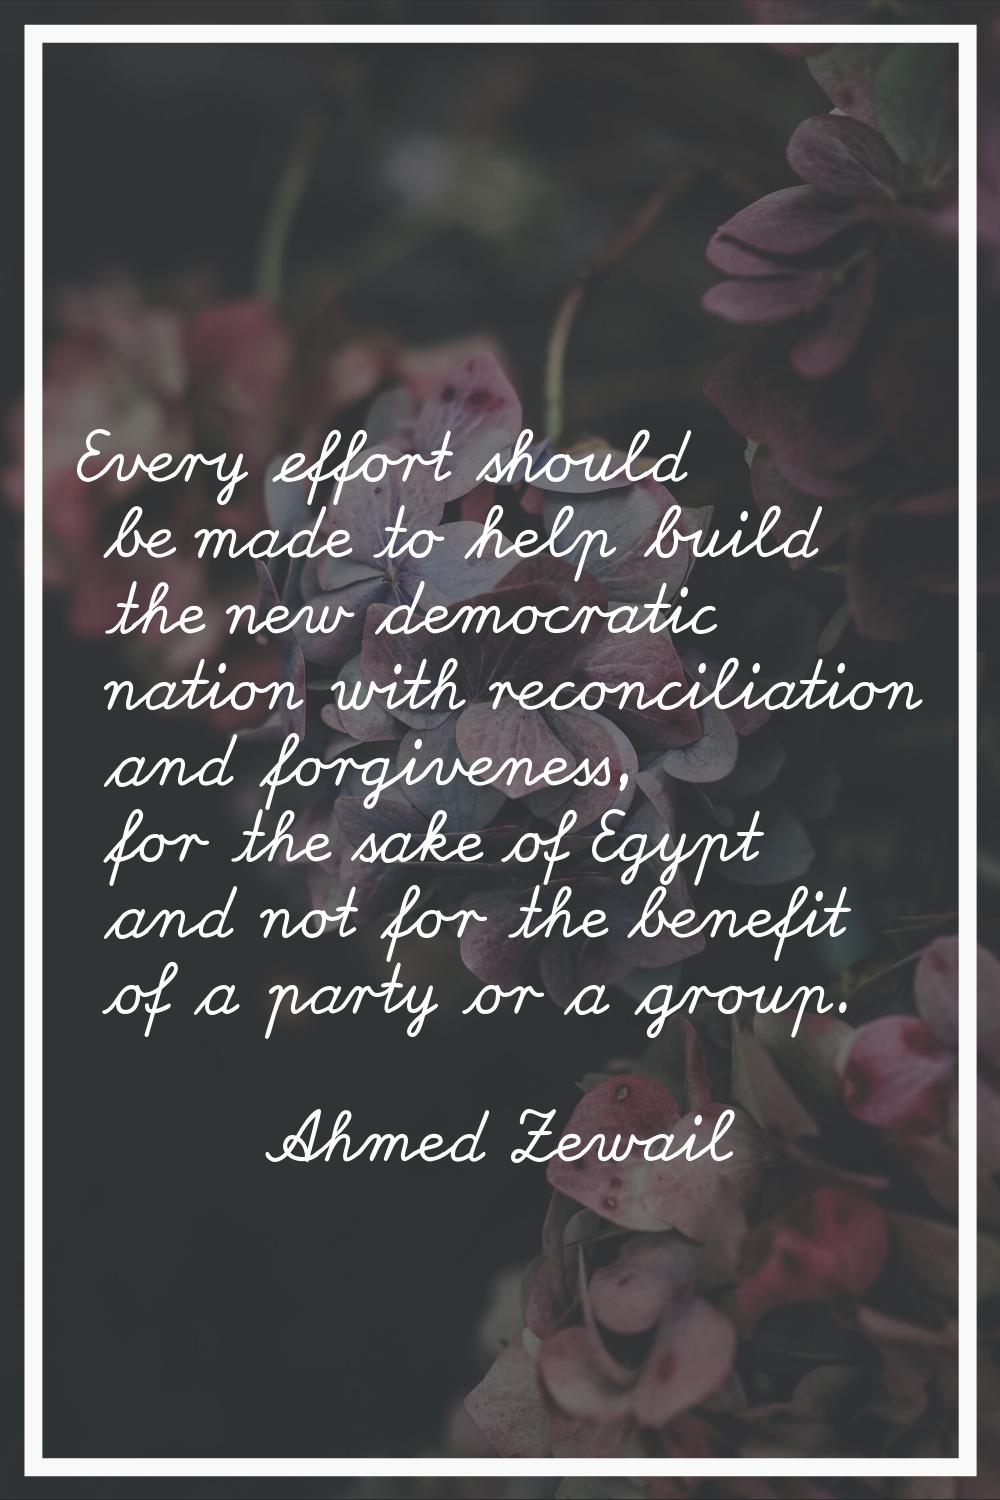 Every effort should be made to help build the new democratic nation with reconciliation and forgive